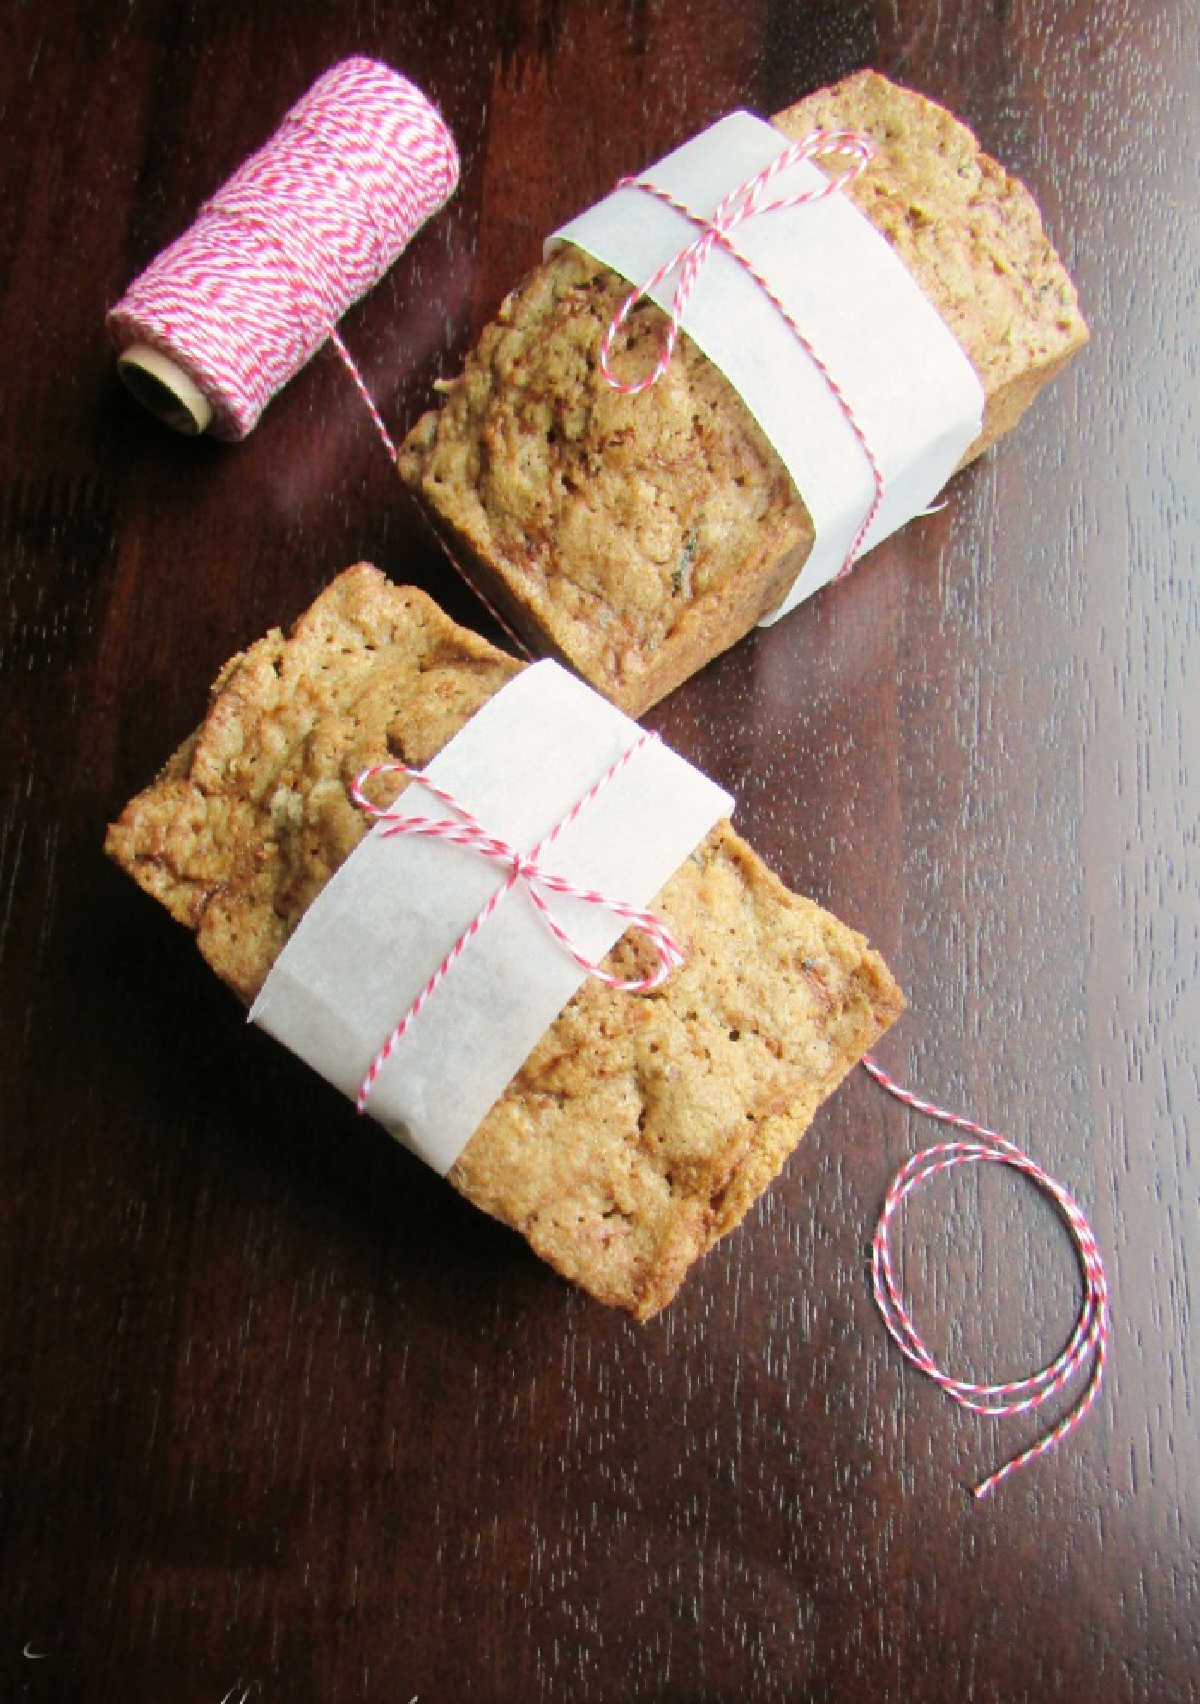 Tying bakers twine and a strip of parchment paper around two mini loaves of zucchini bread, getting them ready to give away.